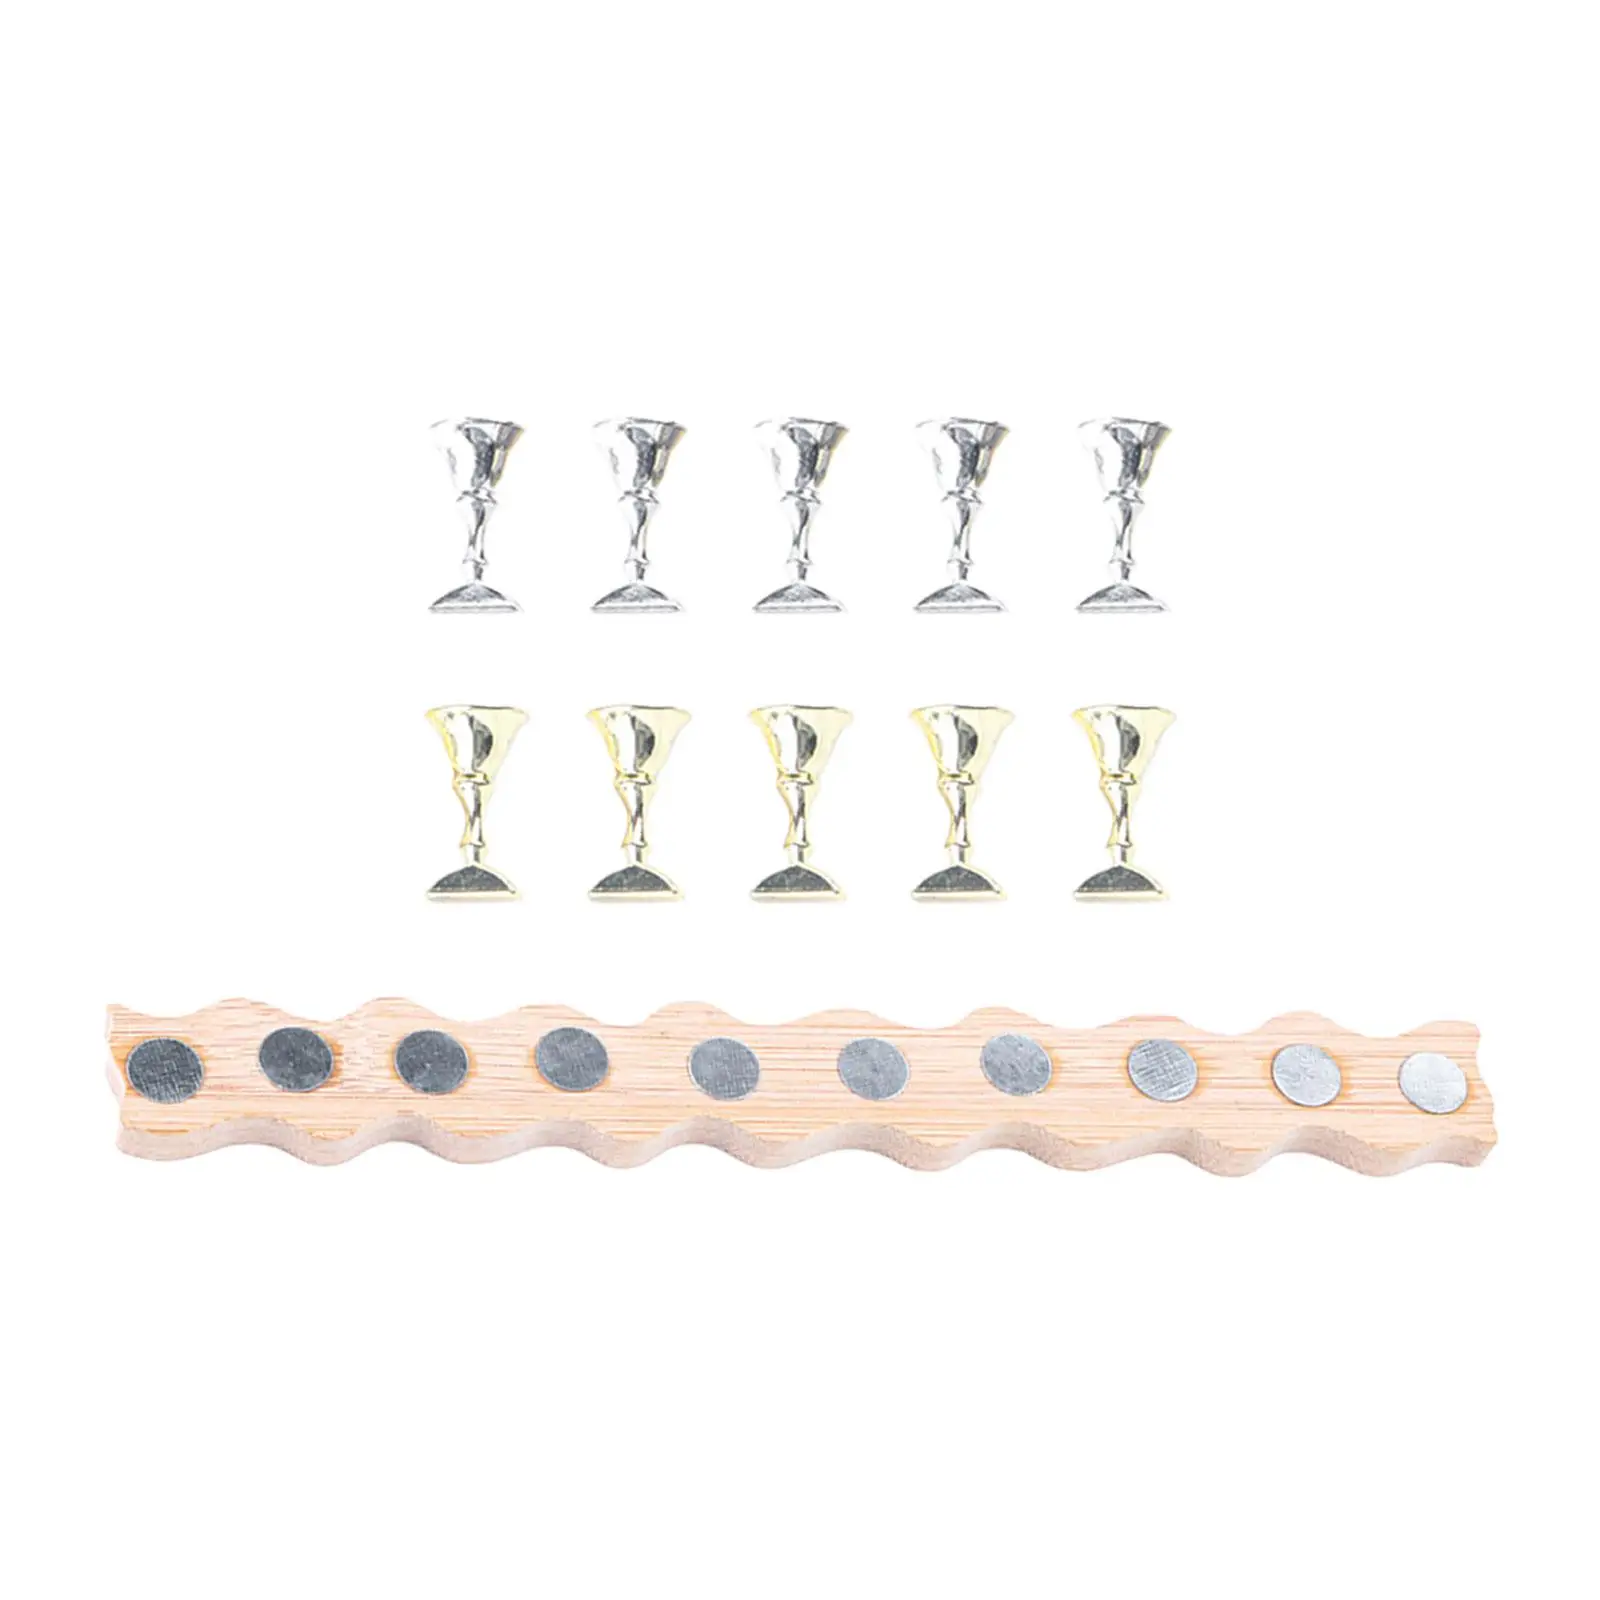 Nail Stand Accessories Professional Manicure Tool Durable Nail Showing Shelf for Beginner Manicurists Makeup Home Salon DIY